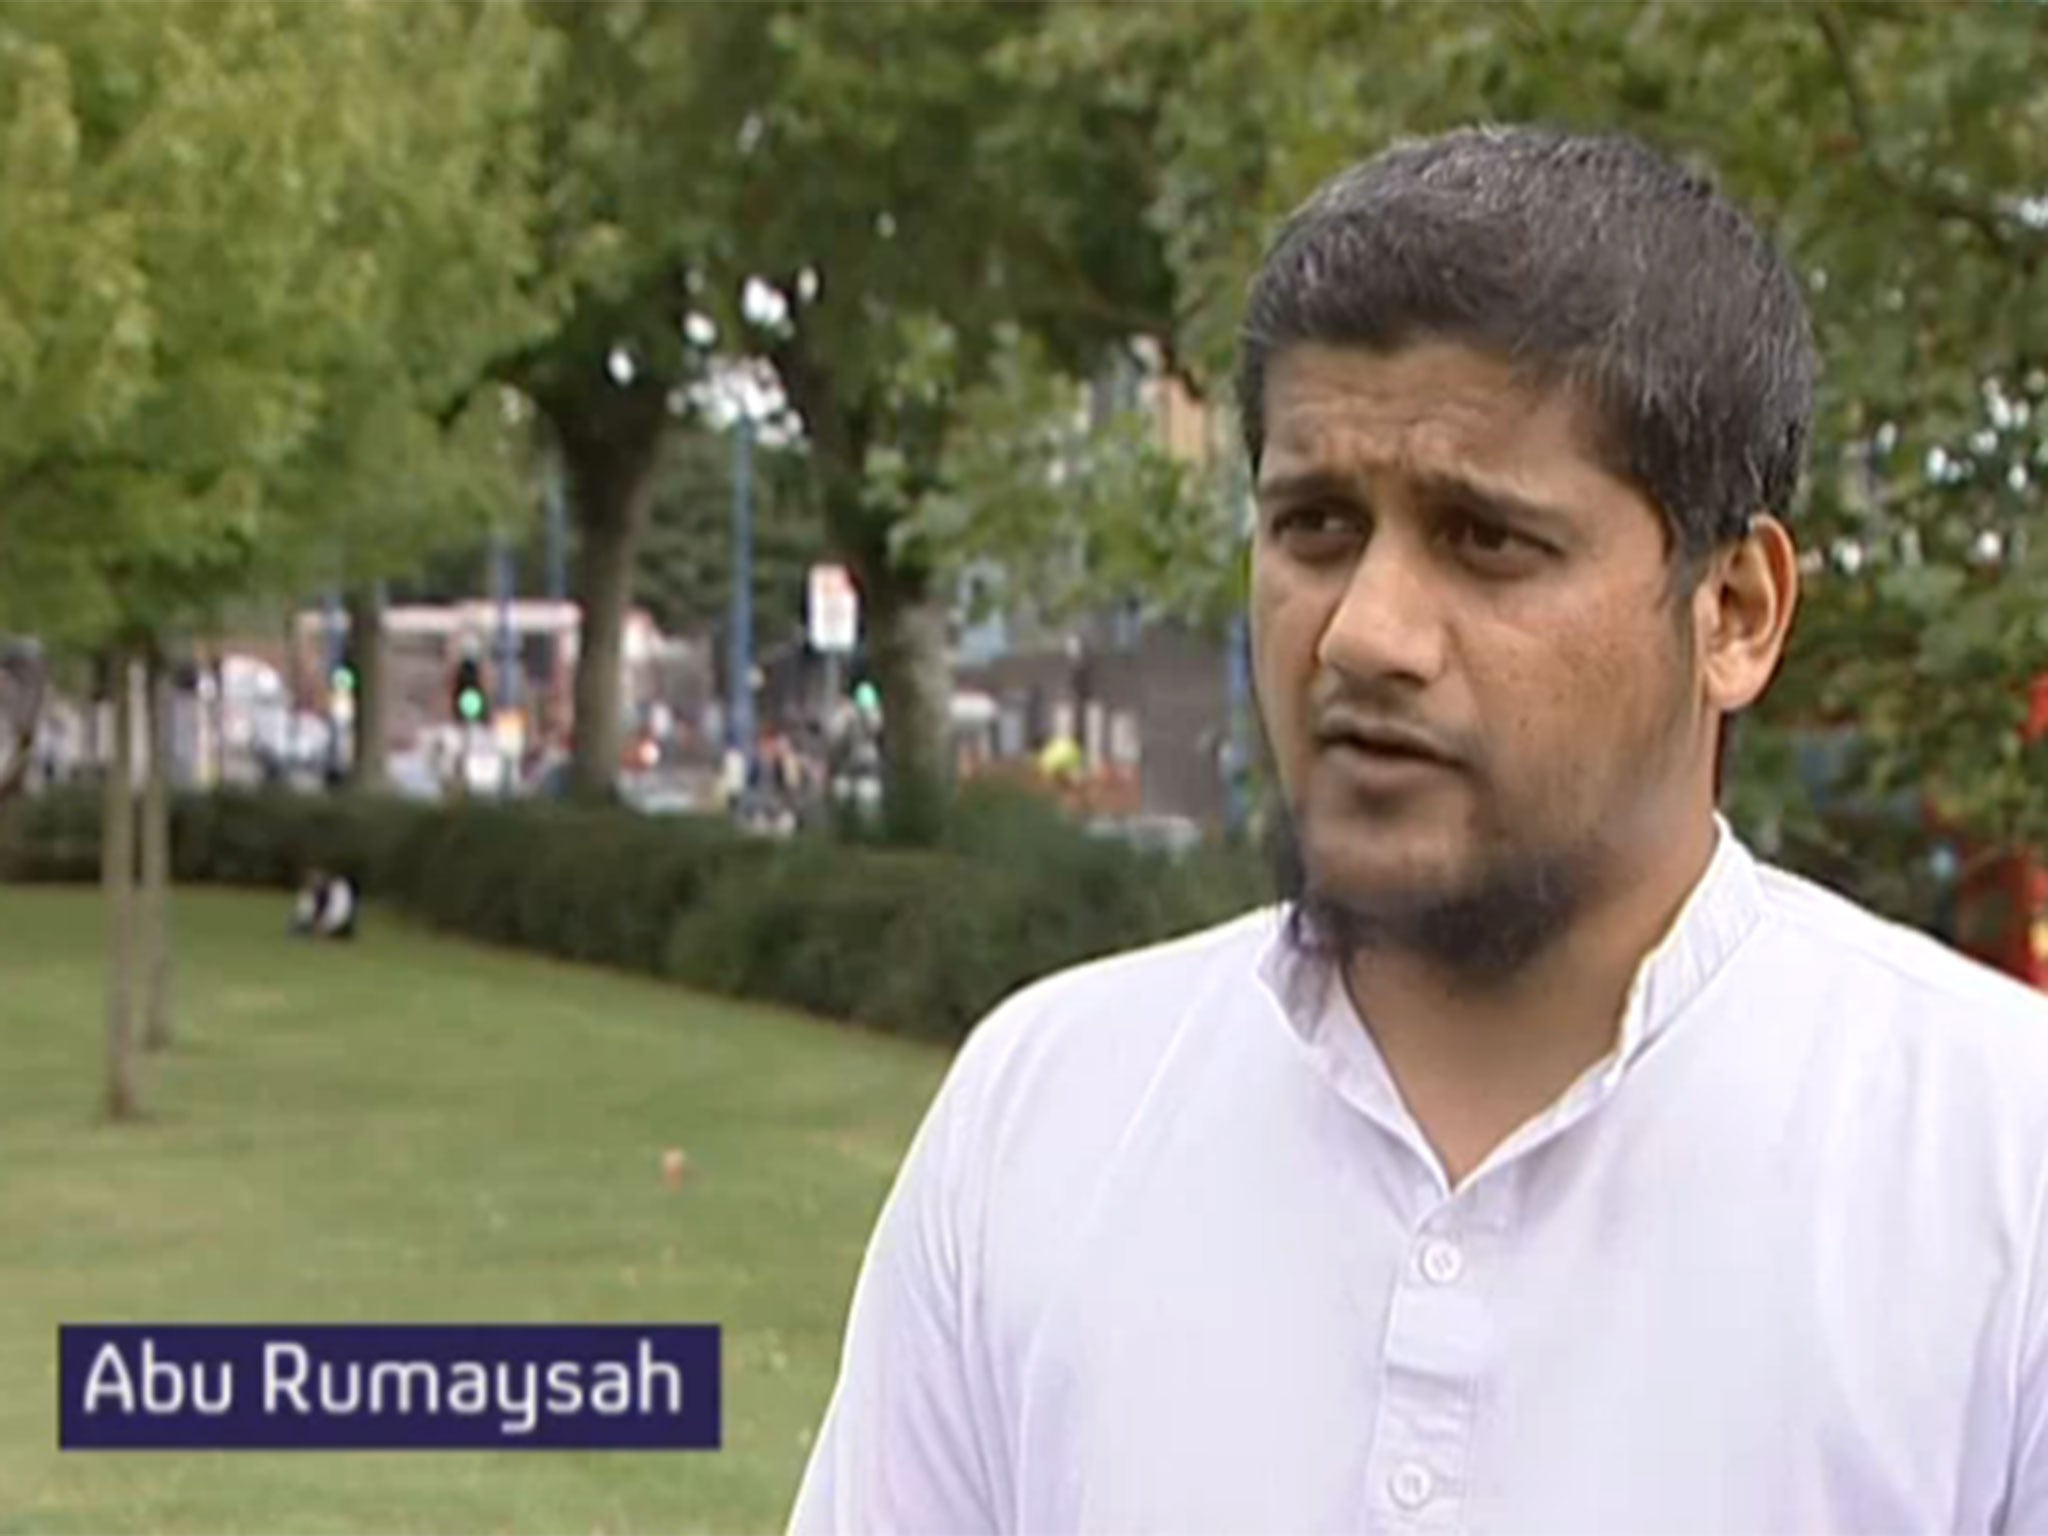 Abu Rumaysah tells Channel 4 News he 'hopes to live under the Islamic State'